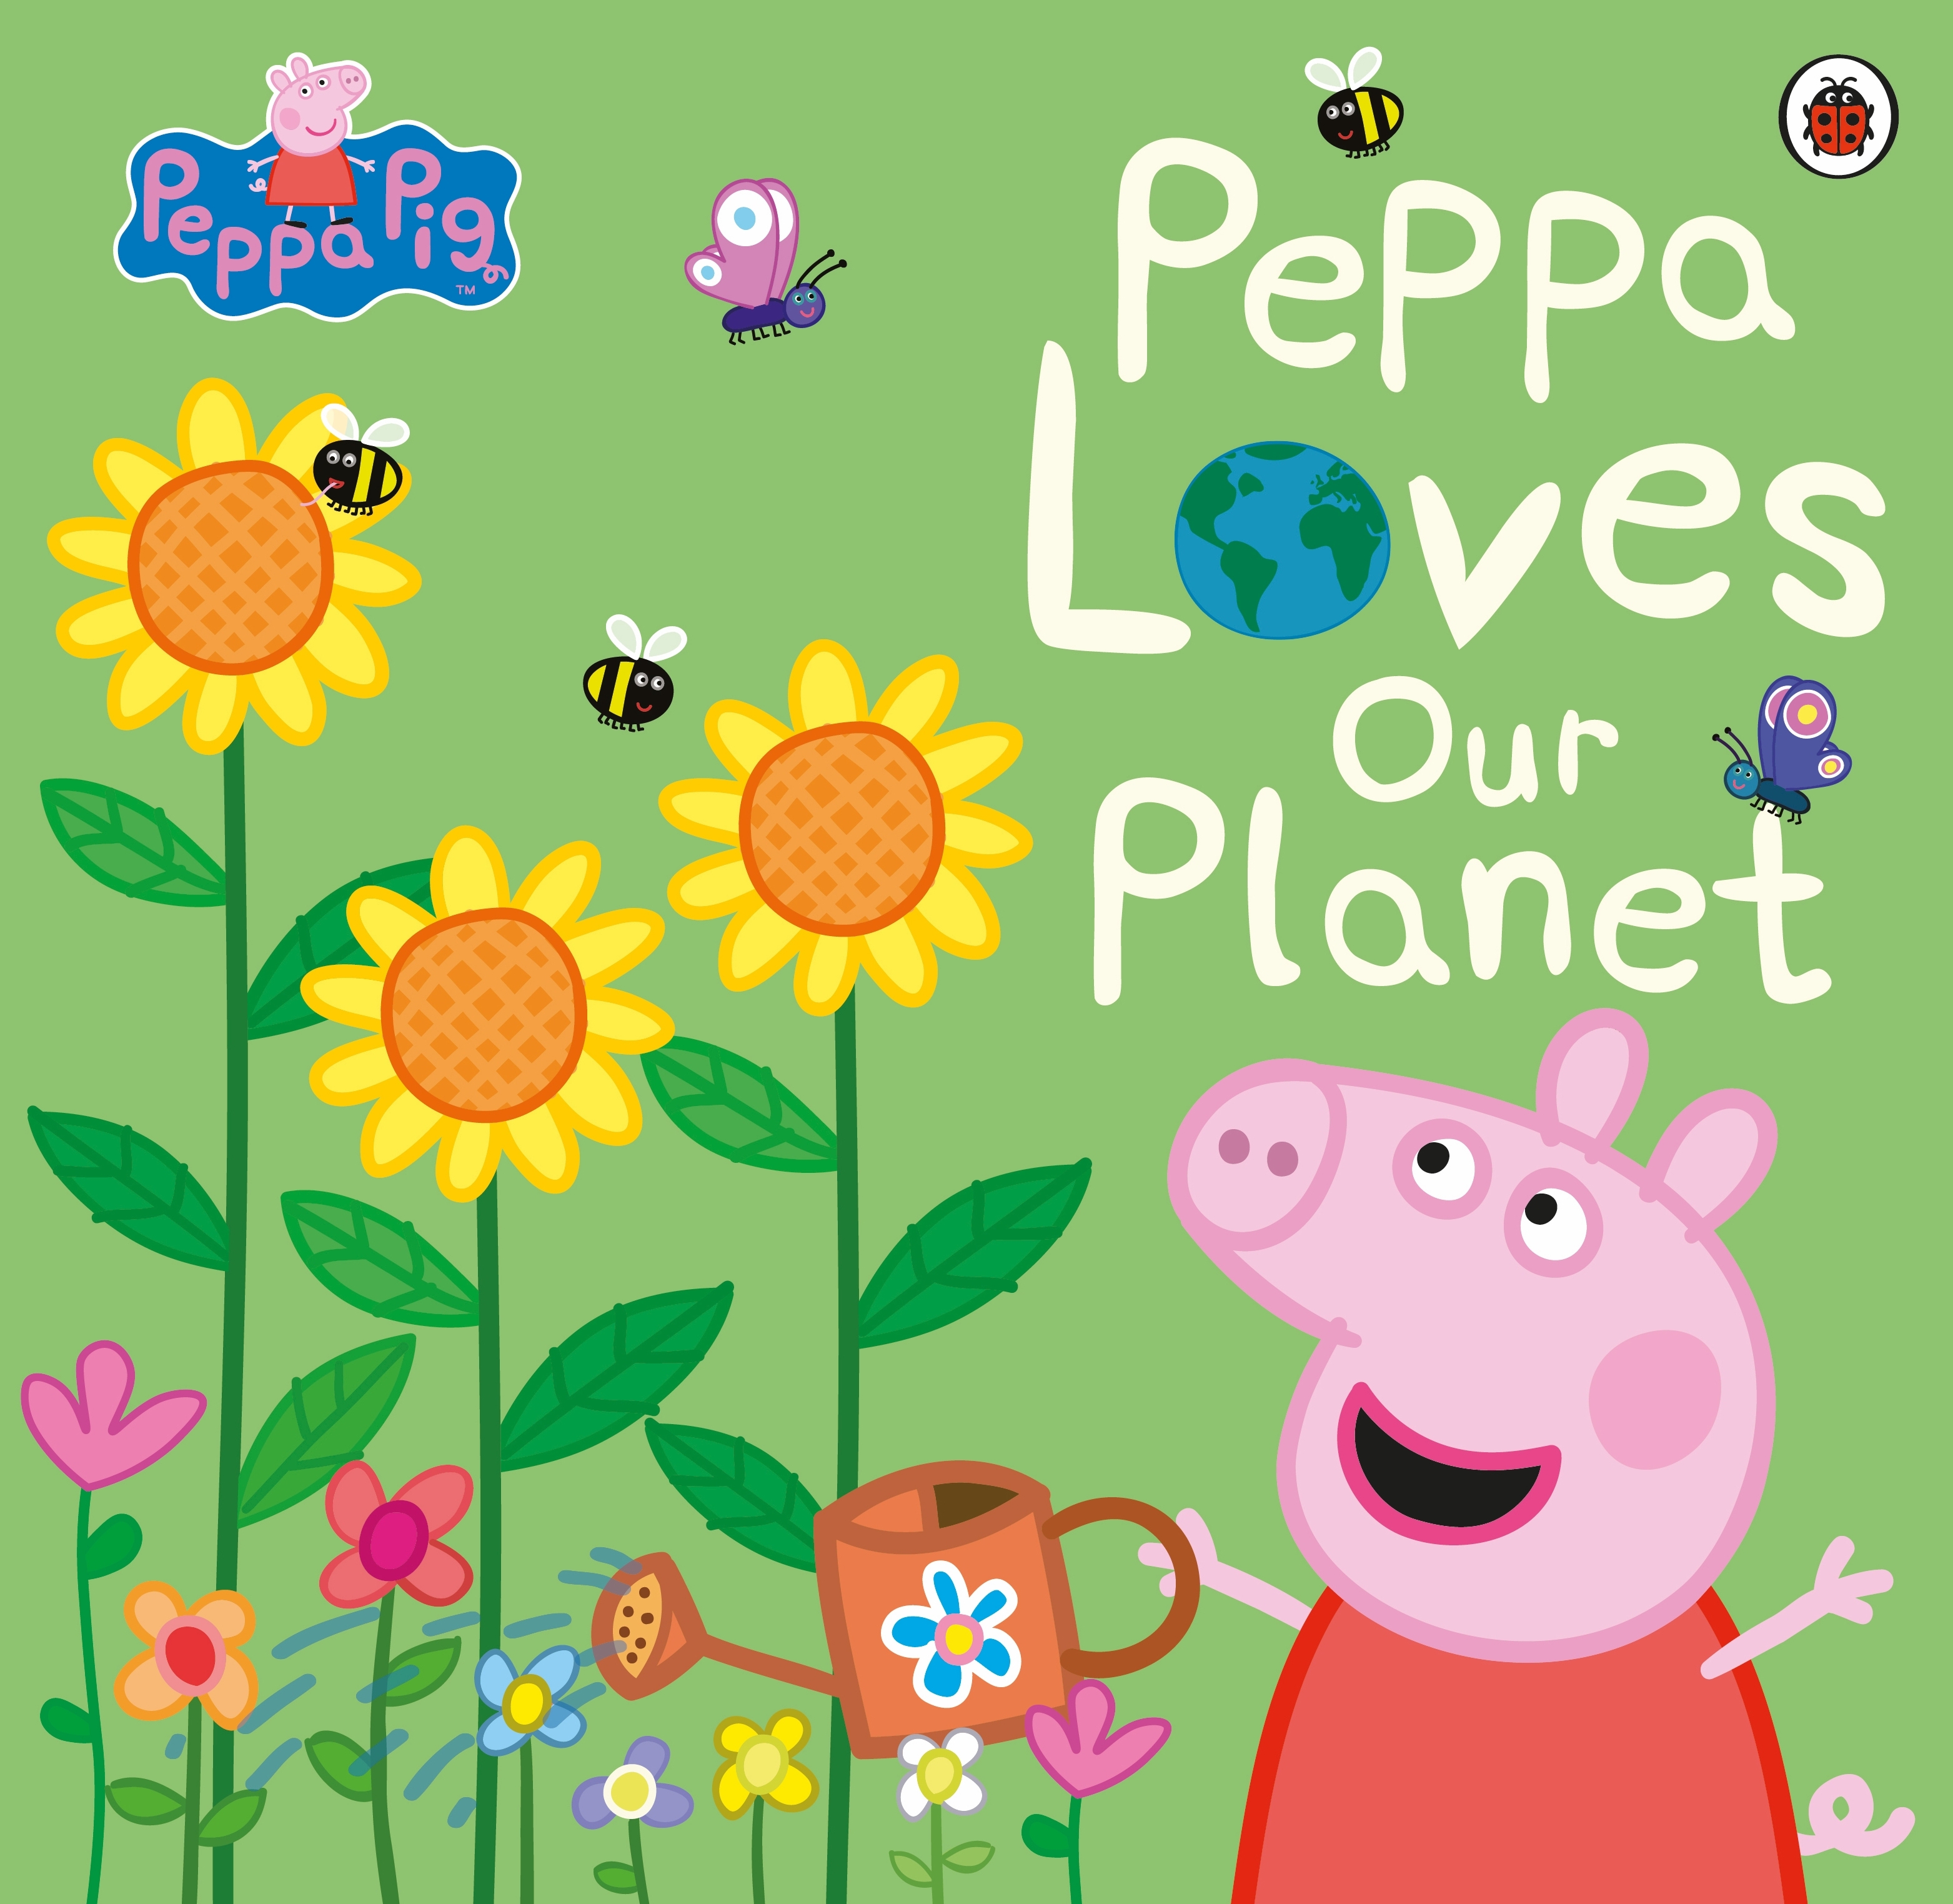 Peppa Pig: Peppa Loves Our Planet by Peppa Pig - Penguin Books Australia